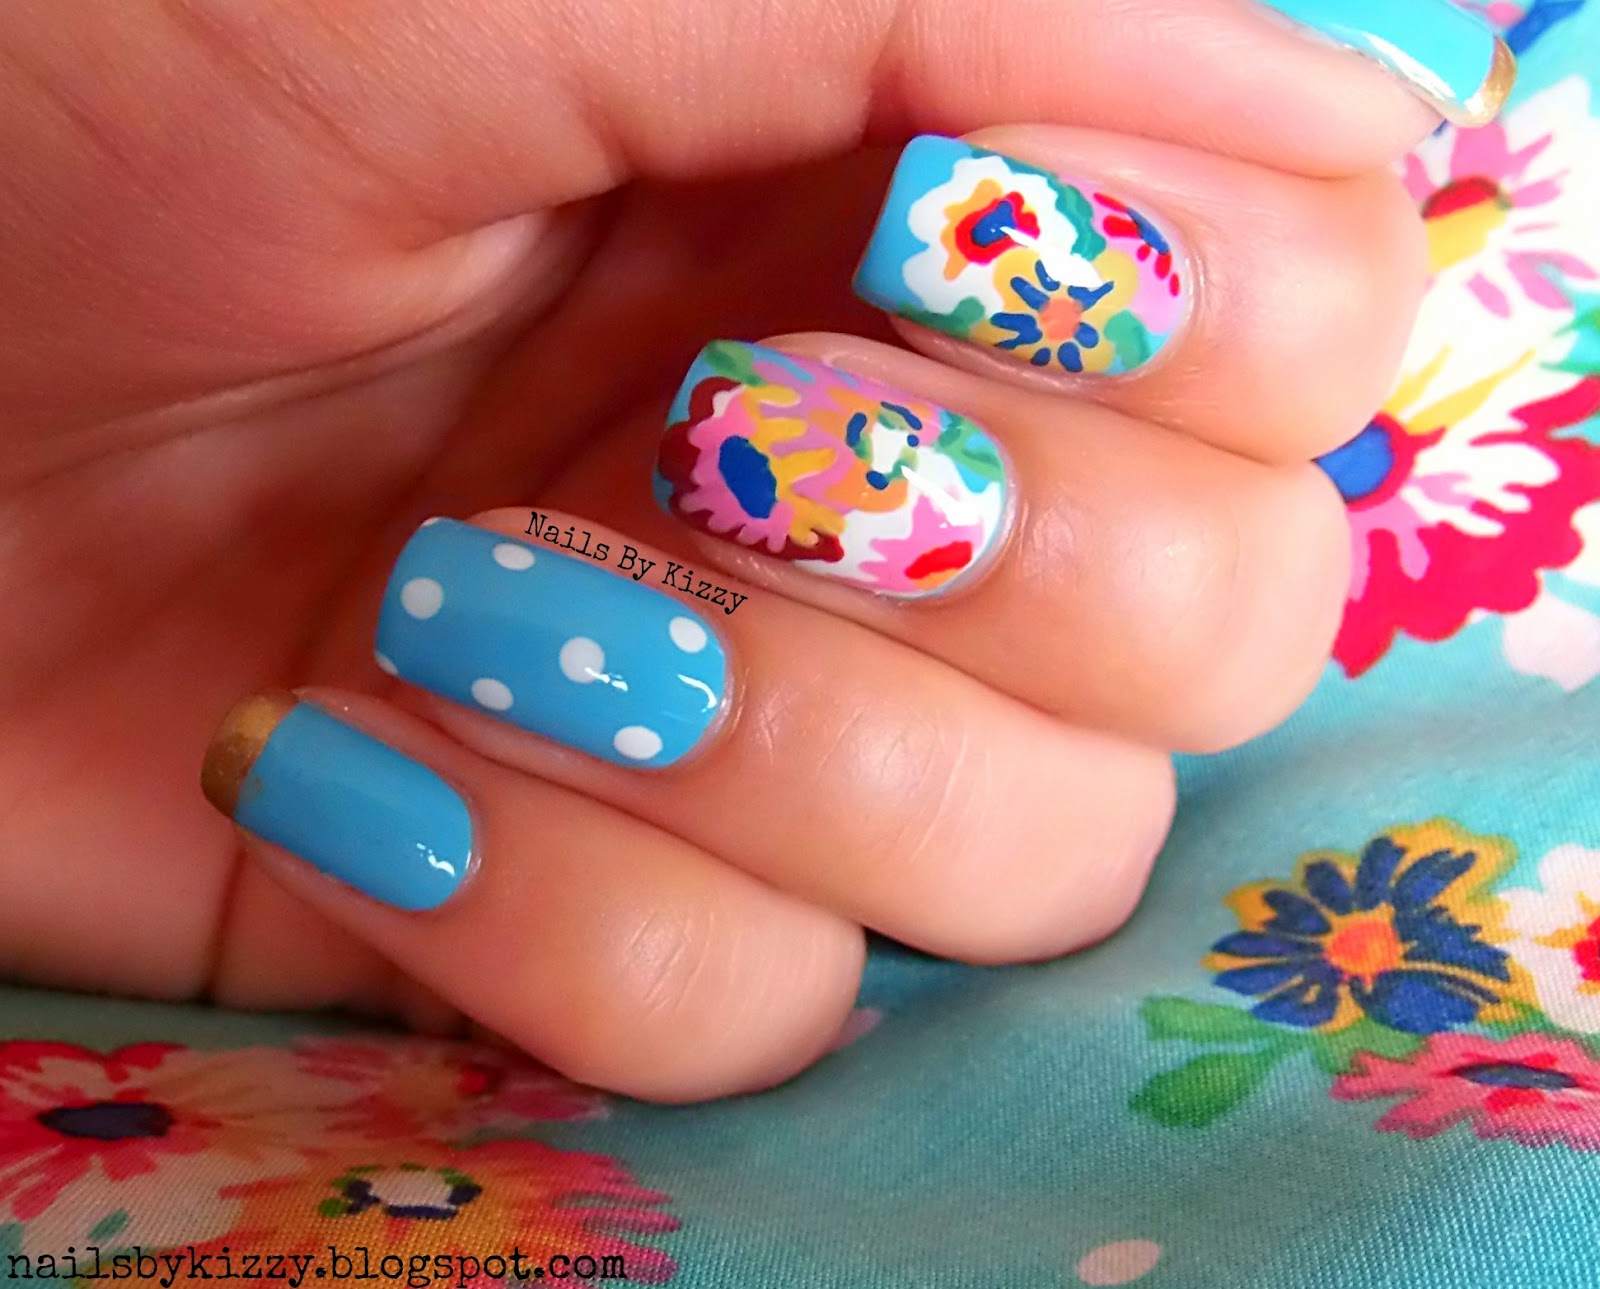 Nails By Kizzy: Florals - match OOTD #NailartMar Challenge